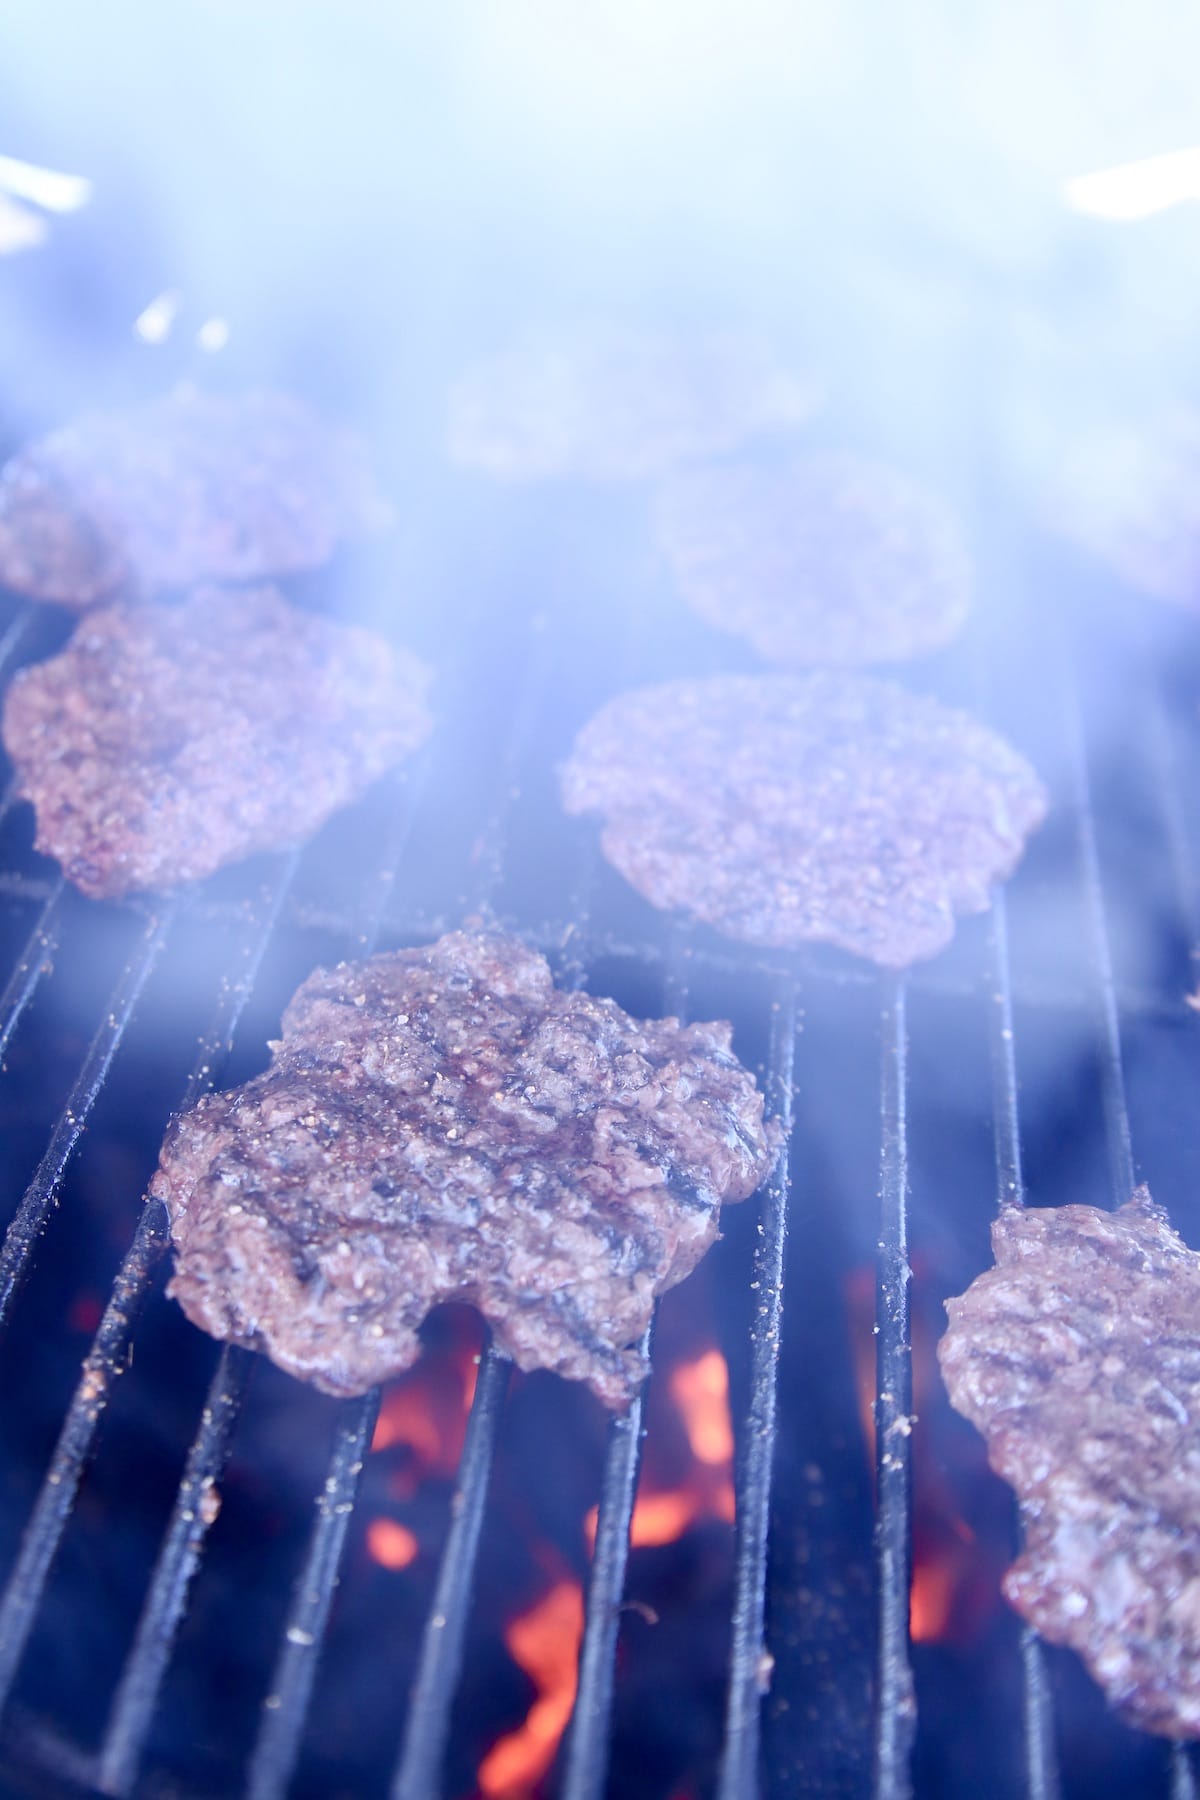 Smoky grill fire with burger patties.